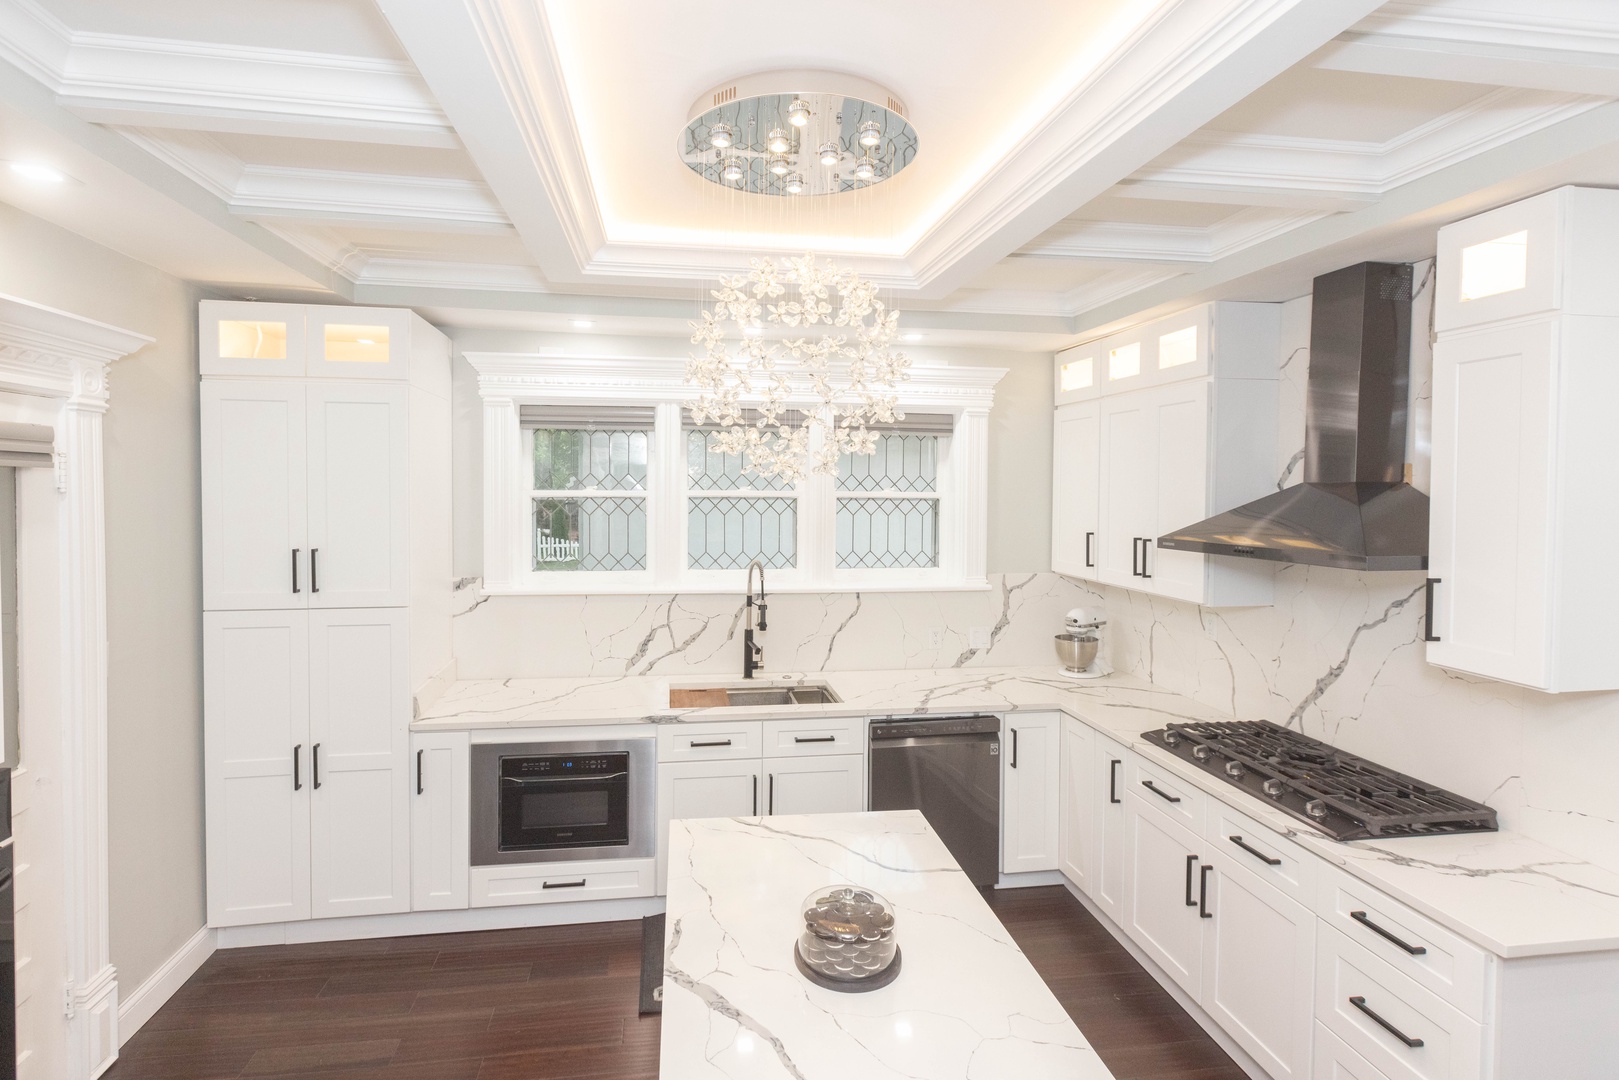 The main house’s kitchen offers ample space & all the comforts of home